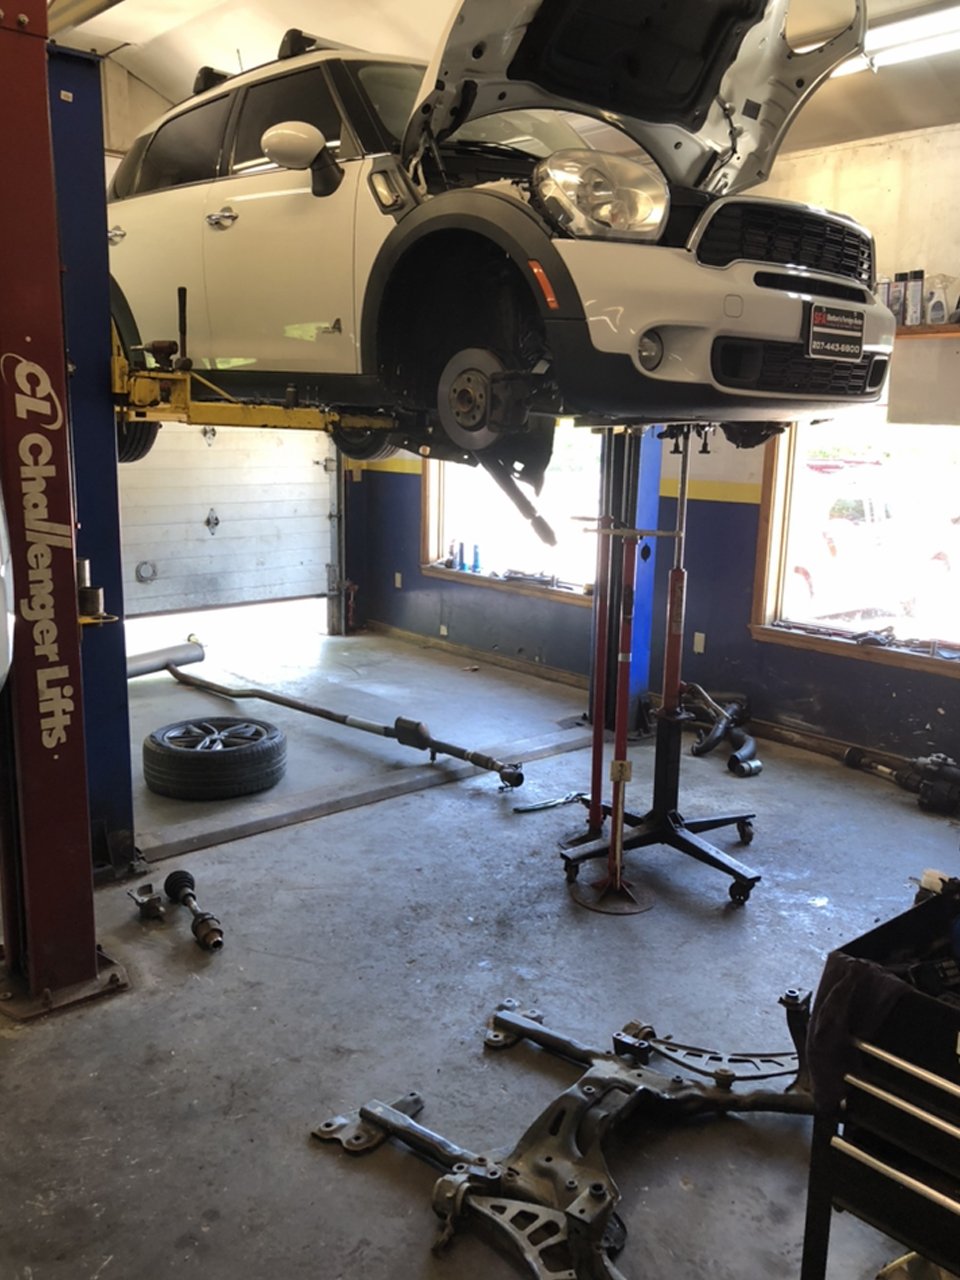 Service - Skelton's Foreign Auto LLC in West Bath, ME